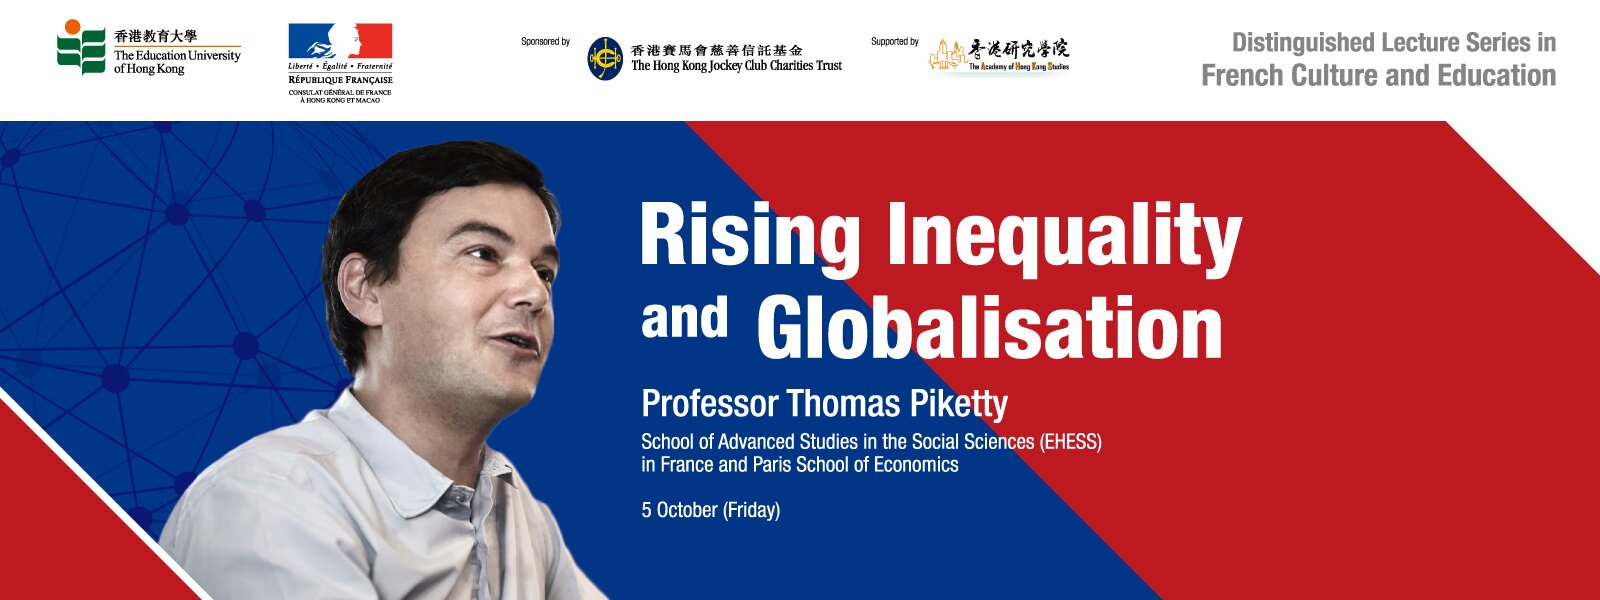 Distinguished Lecture on “Rising Inequality and Globalisation”